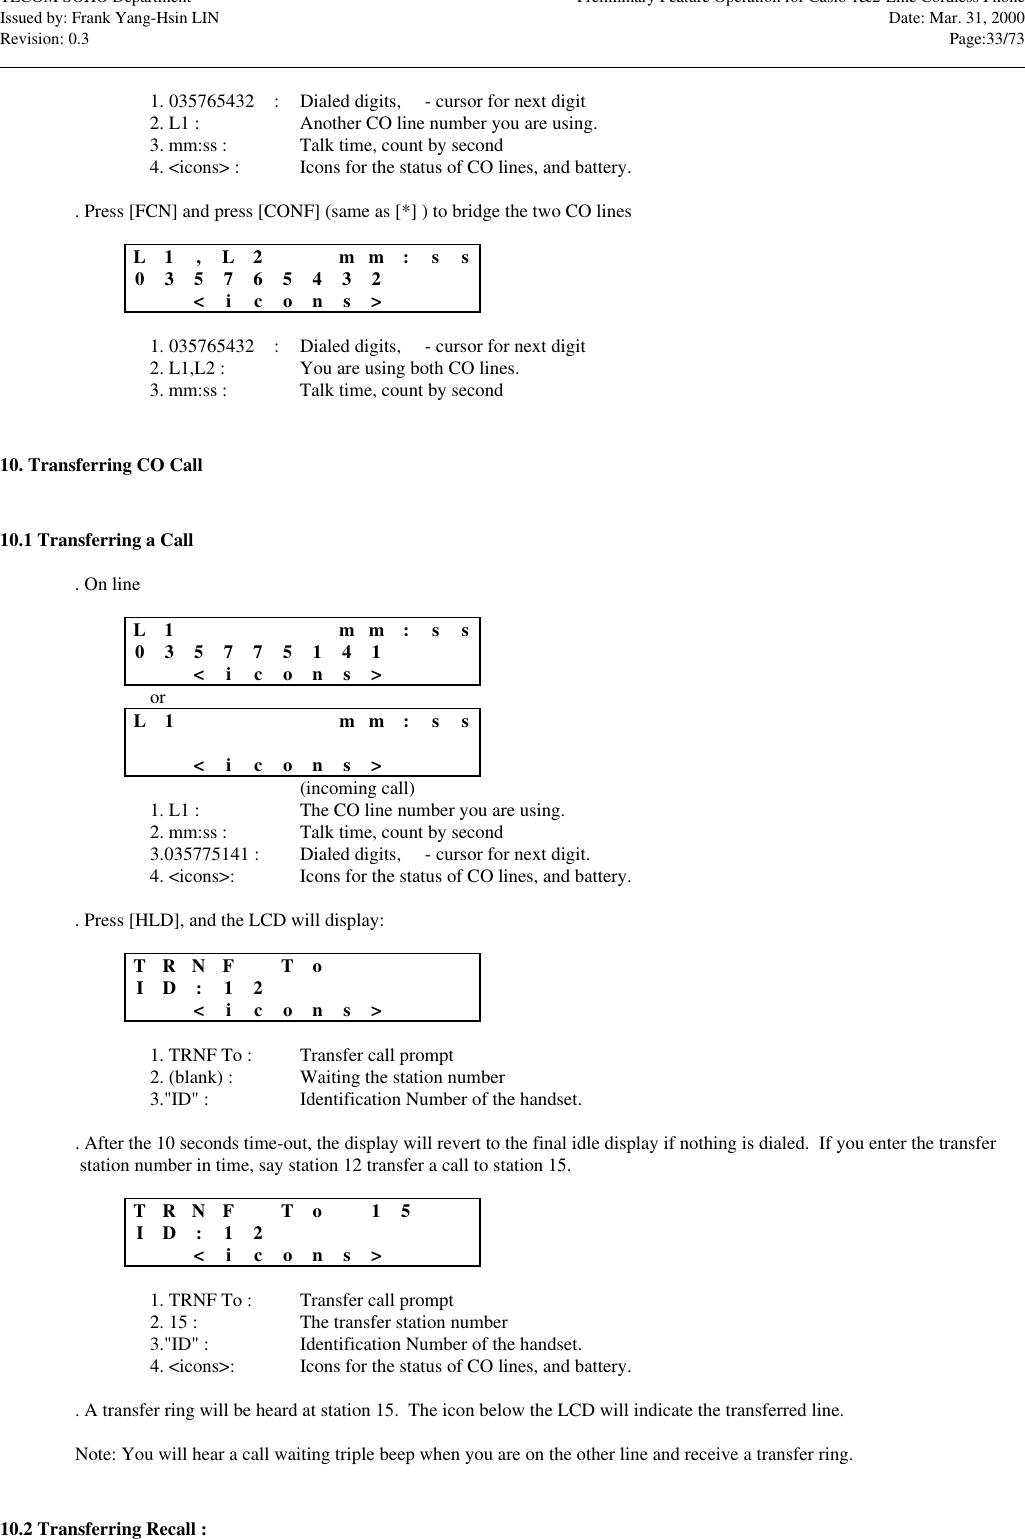 TECOM SOHO Department Preliminary Feature Operation for Casio 1&amp;2-Line Cordless PhoneIssued by: Frank Yang-Hsin LIN Date: Mar. 31, 2000Revision: 0.3 Page:33/73                                                                                                                                                                                                                                                                                                                            1. 035765432nn : Dialed digits, n - cursor for next digit2. L1 : Another CO line number you are using.3. mm:ss : Talk time, count by second4. &lt;icons&gt; : Icons for the status of CO lines, and battery.. Press [FCN] and press [CONF] (same as [*] ) to bridge the two CO linesL1,L2m m :s s035765432nn&lt;icons&gt;1. 035765432nn : Dialed digits, n - cursor for next digit2. L1,L2 : You are using both CO lines.3. mm:ss : Talk time, count by second10. Transferring CO Call10.1 Transferring a Call. On lineL1m m :s s035775141nn&lt;icons&gt;orL1m m :s s&lt;icons&gt;(incoming call)1. L1 : The CO line number you are using.2. mm:ss : Talk time, count by second3.035775141 : Dialed digits, n - cursor for next digit.4. &lt;icons&gt;: Icons for the status of CO lines, and battery.. Press [HLD], and the LCD will display:TR N FToID:1 2&lt;icons&gt;1. TRNF To : Transfer call prompt2. (blank) : Waiting the station number3.&quot;ID&quot; : Identification Number of the handset.. After the 10 seconds time-out, the display will revert to the final idle display if nothing is dialed.  If you enter the transfer station number in time, say station 12 transfer a call to station 15.TR N FTo1 5ID:1 2&lt;icons&gt;1. TRNF To : Transfer call prompt2. 15 : The transfer station number3.&quot;ID&quot; : Identification Number of the handset.4. &lt;icons&gt;: Icons for the status of CO lines, and battery.. A transfer ring will be heard at station 15.  The icon below the LCD will indicate the transferred line.Note: You will hear a call waiting triple beep when you are on the other line and receive a transfer ring.10.2 Transferring Recall :